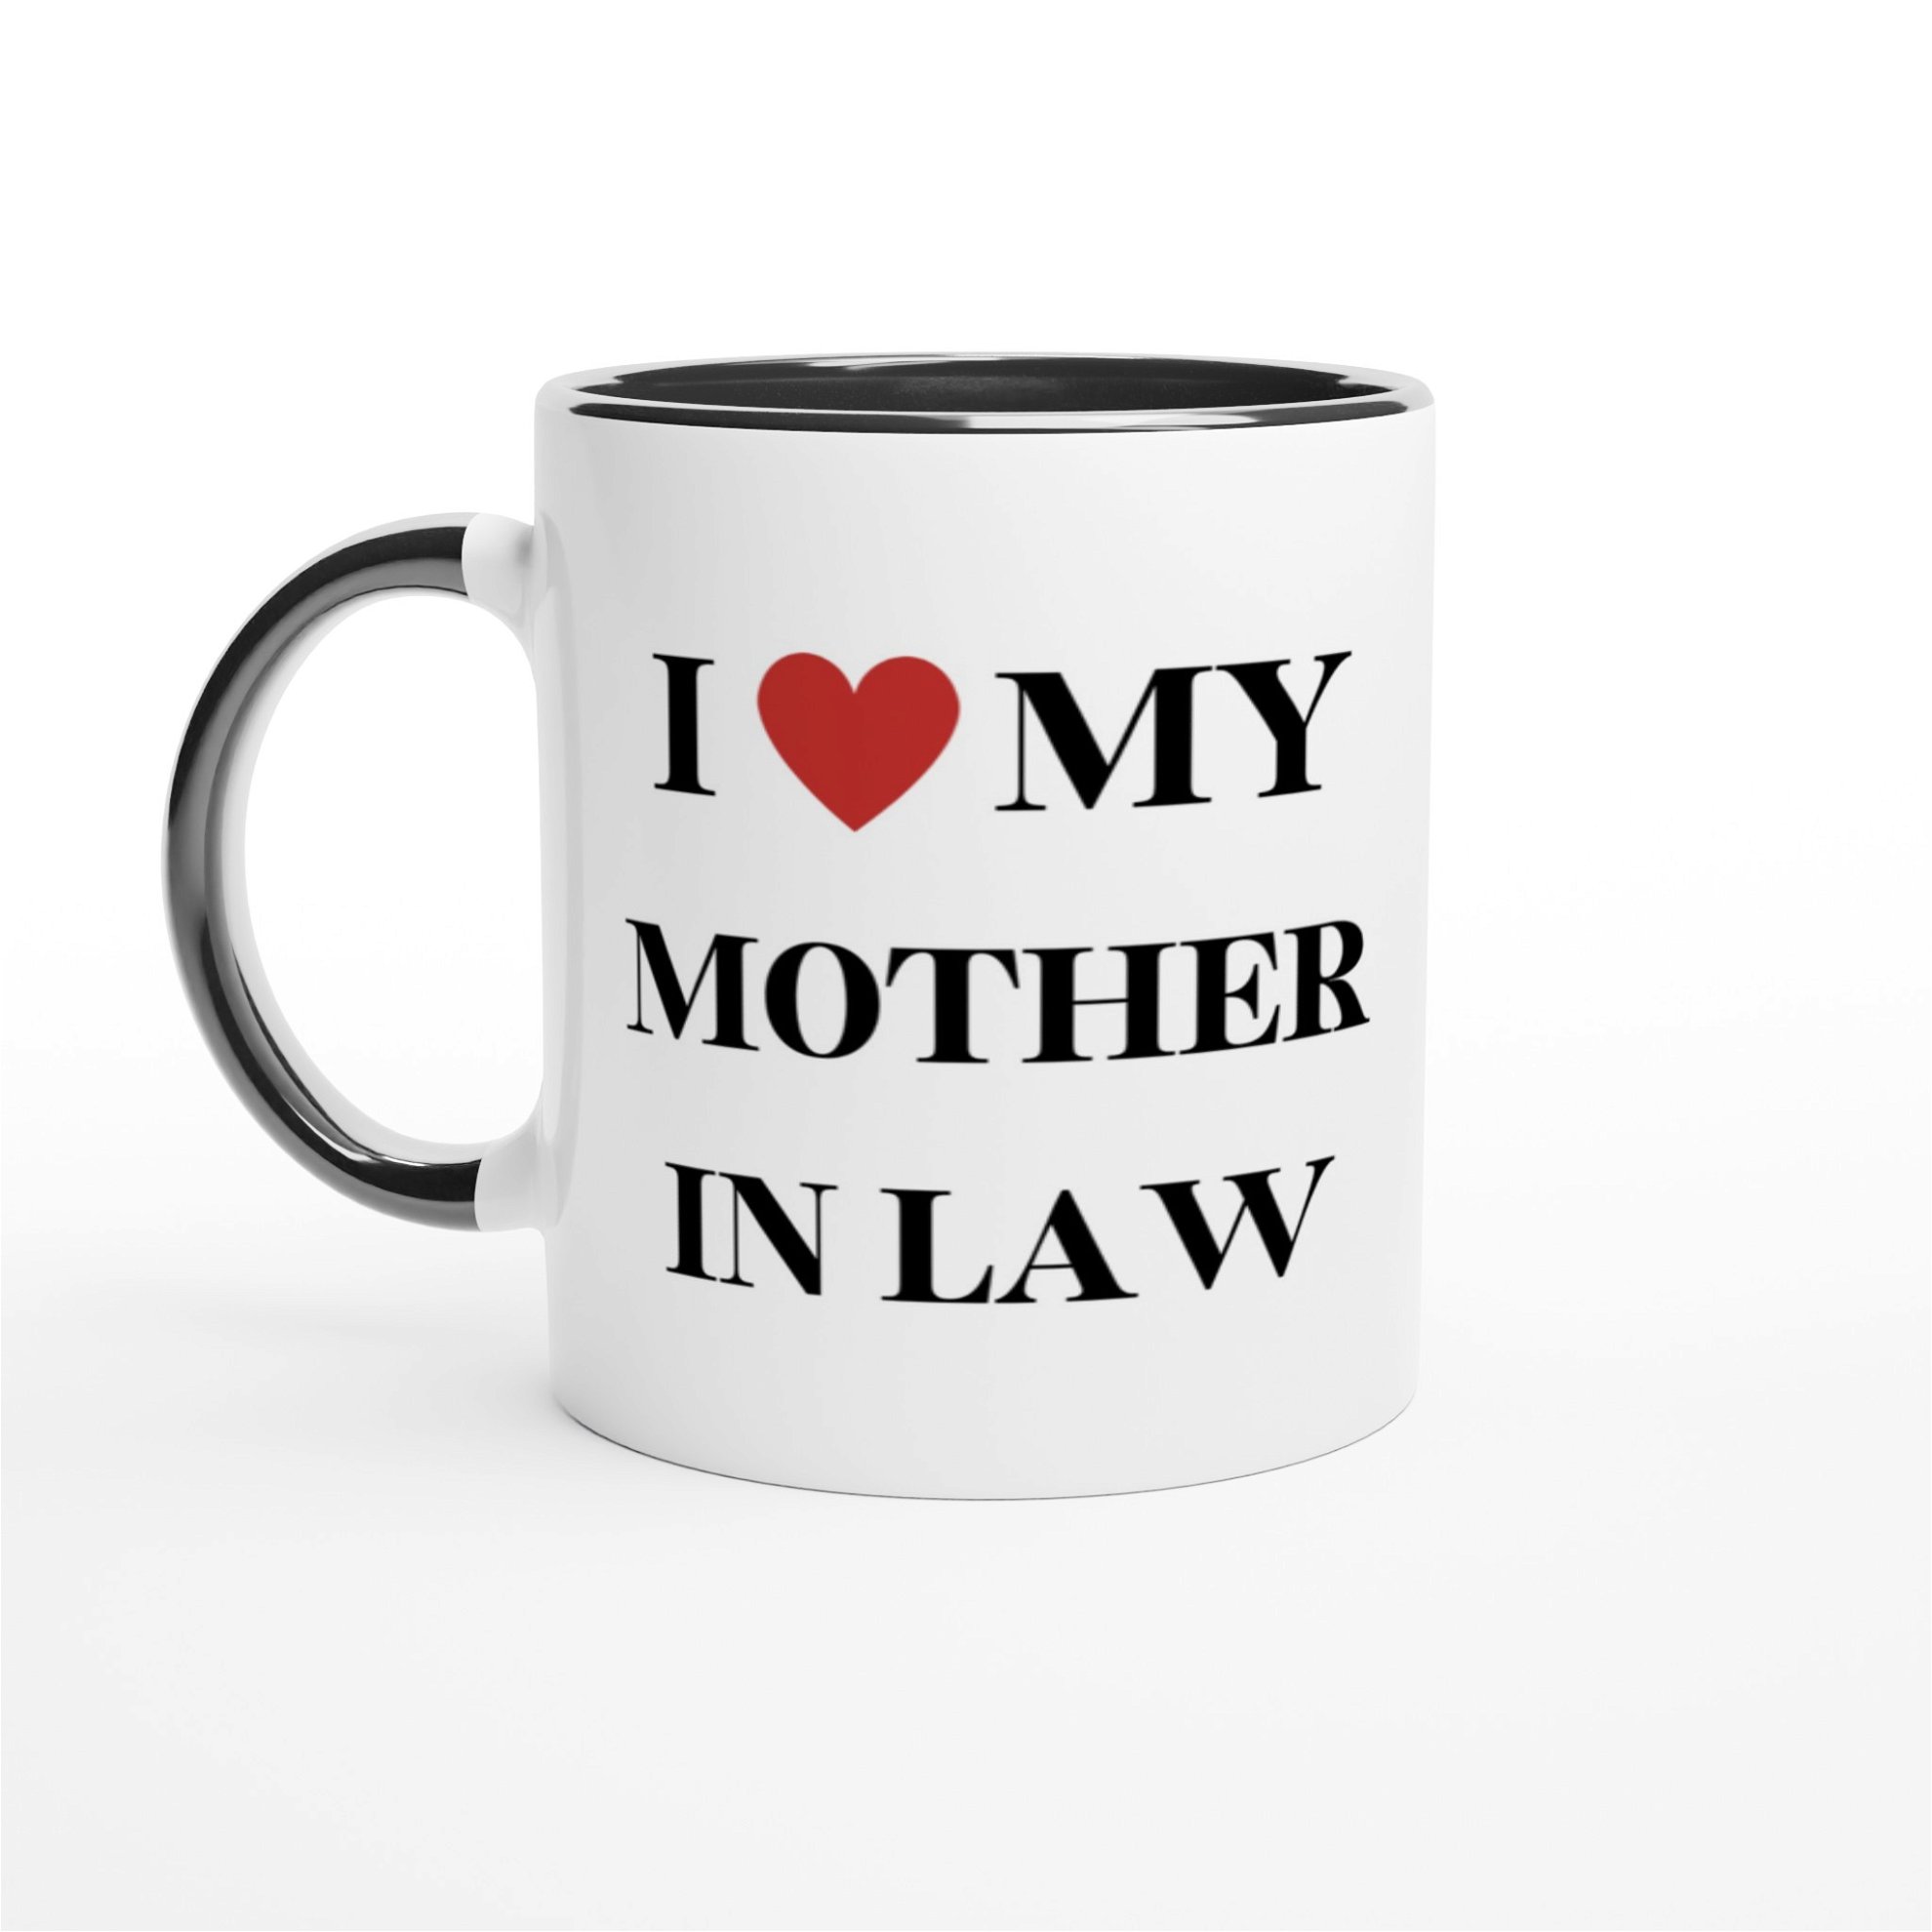 I Love My Mother In Law Mug Cheeky T For Dads